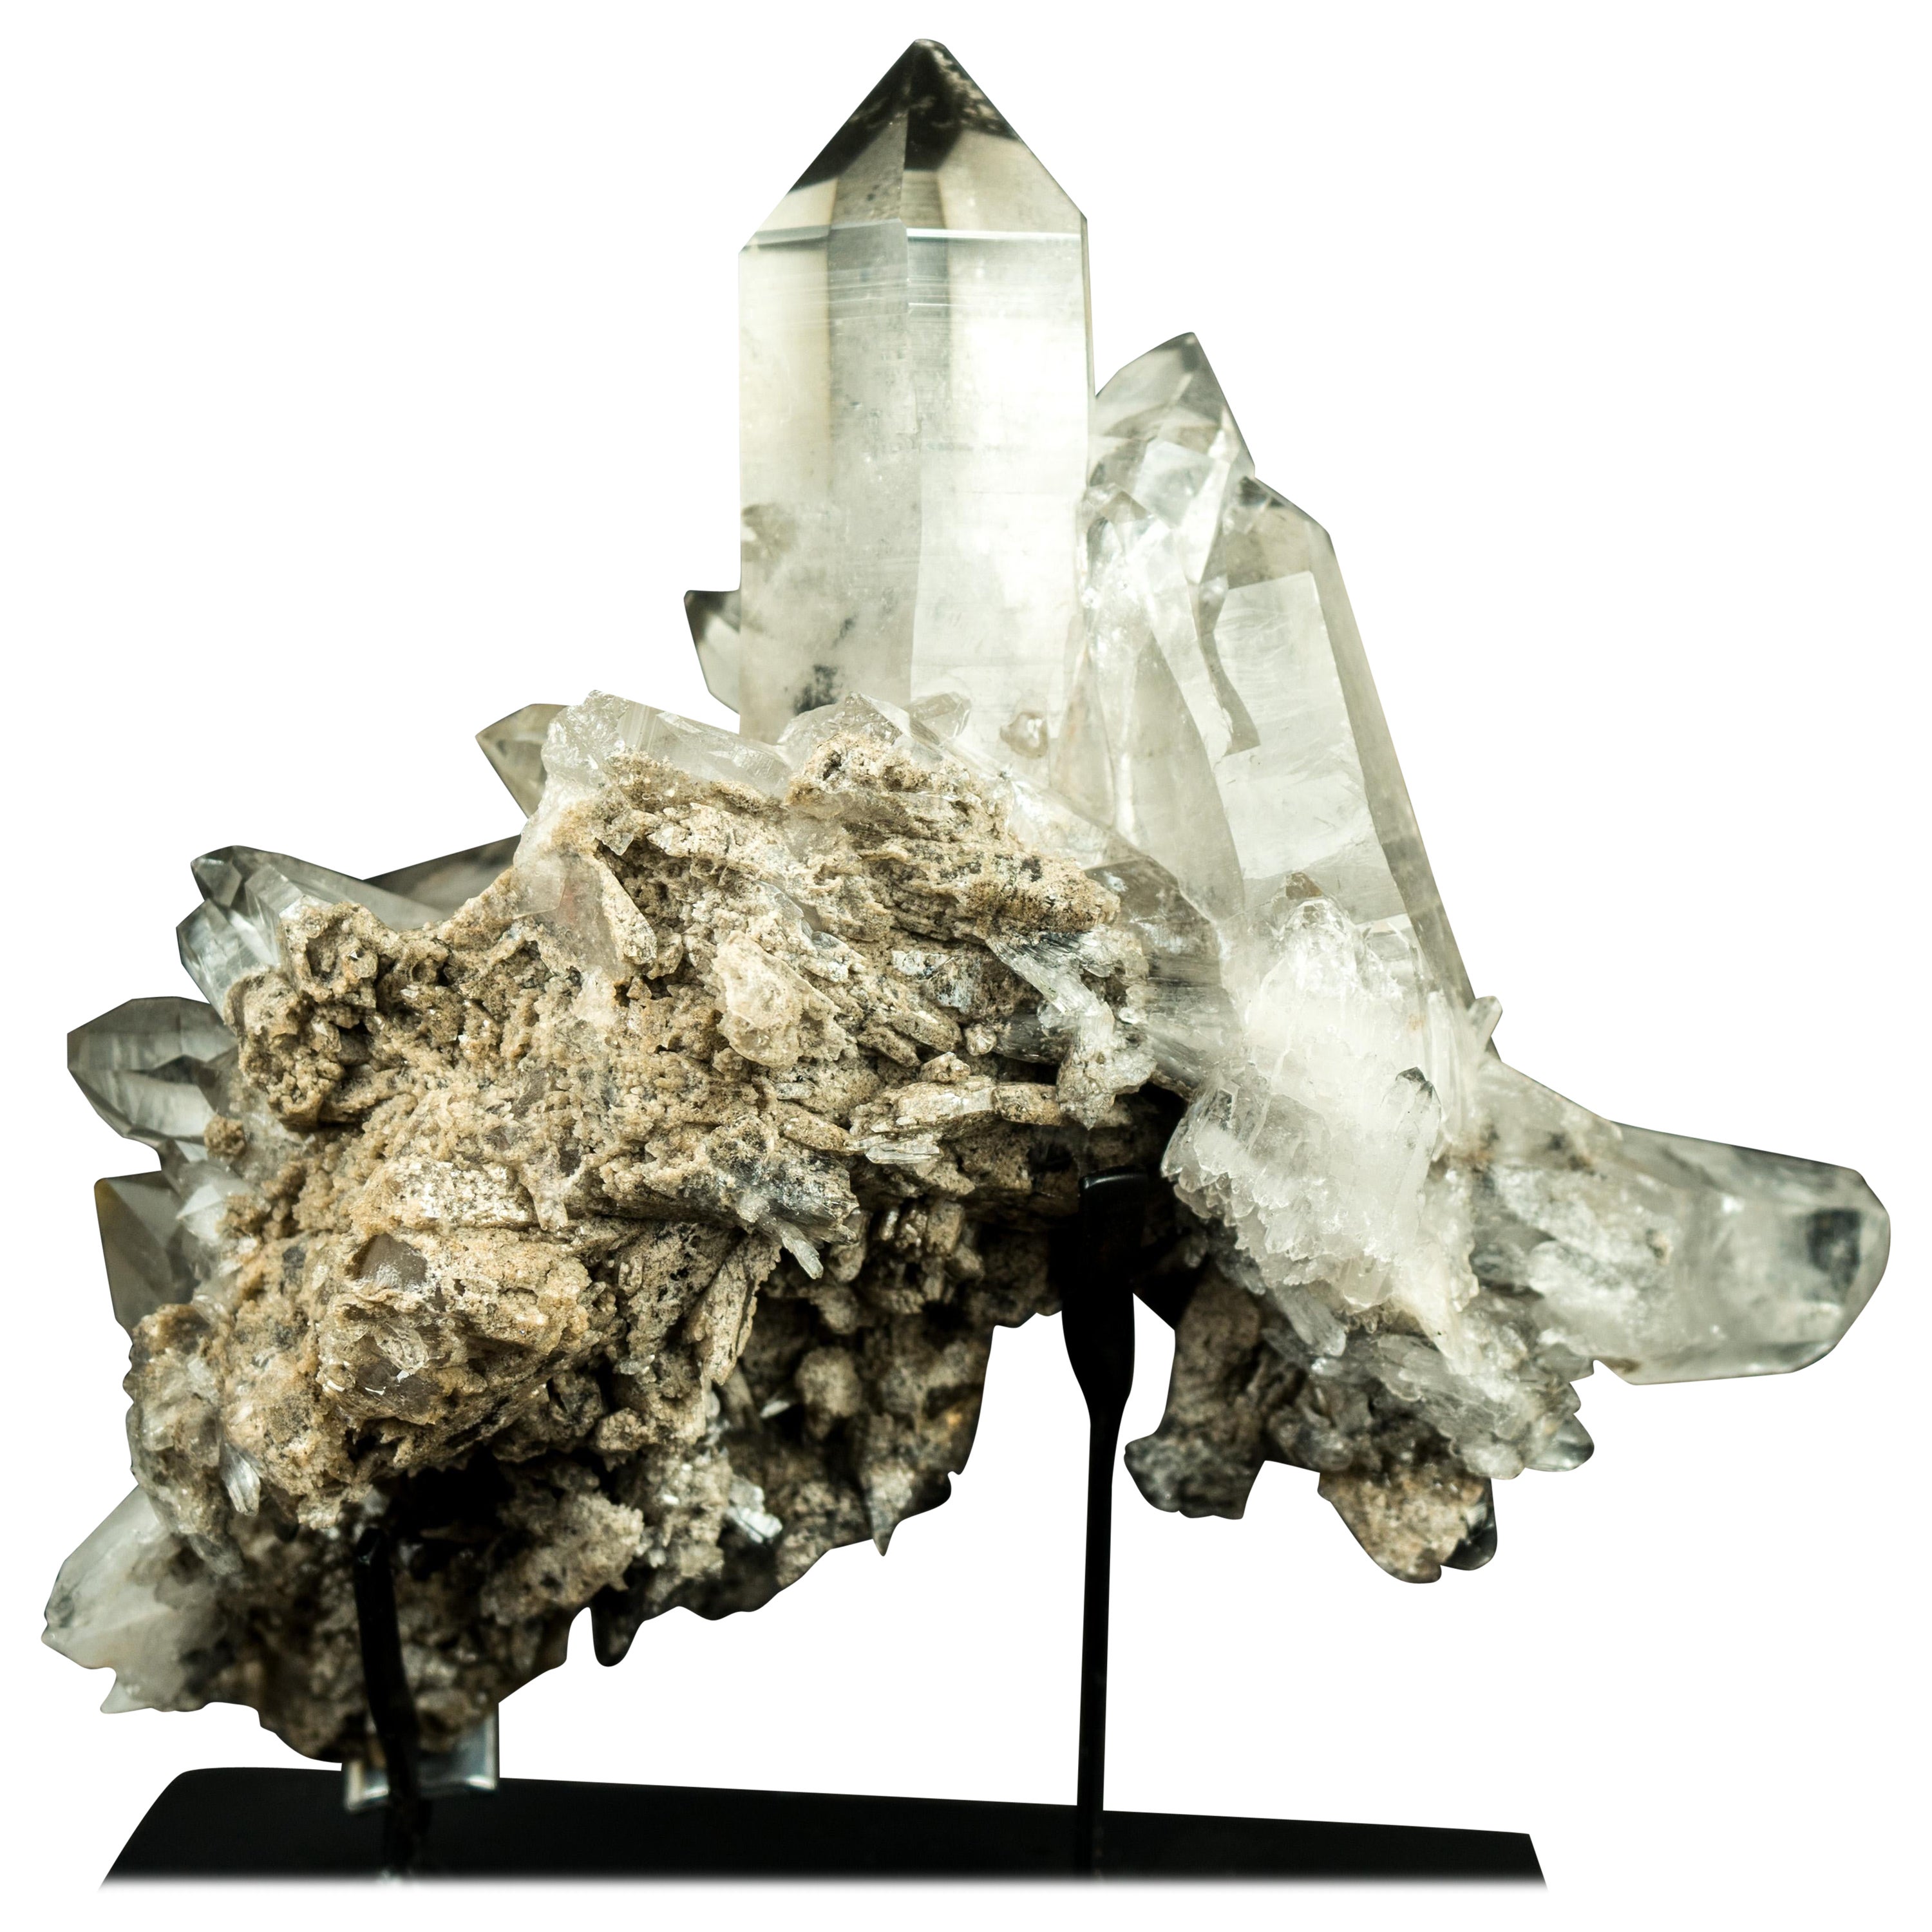 Gallery Grade Lemurian Crystal Cluster with Gray Dreamcoat Lithium Phantom For Sale